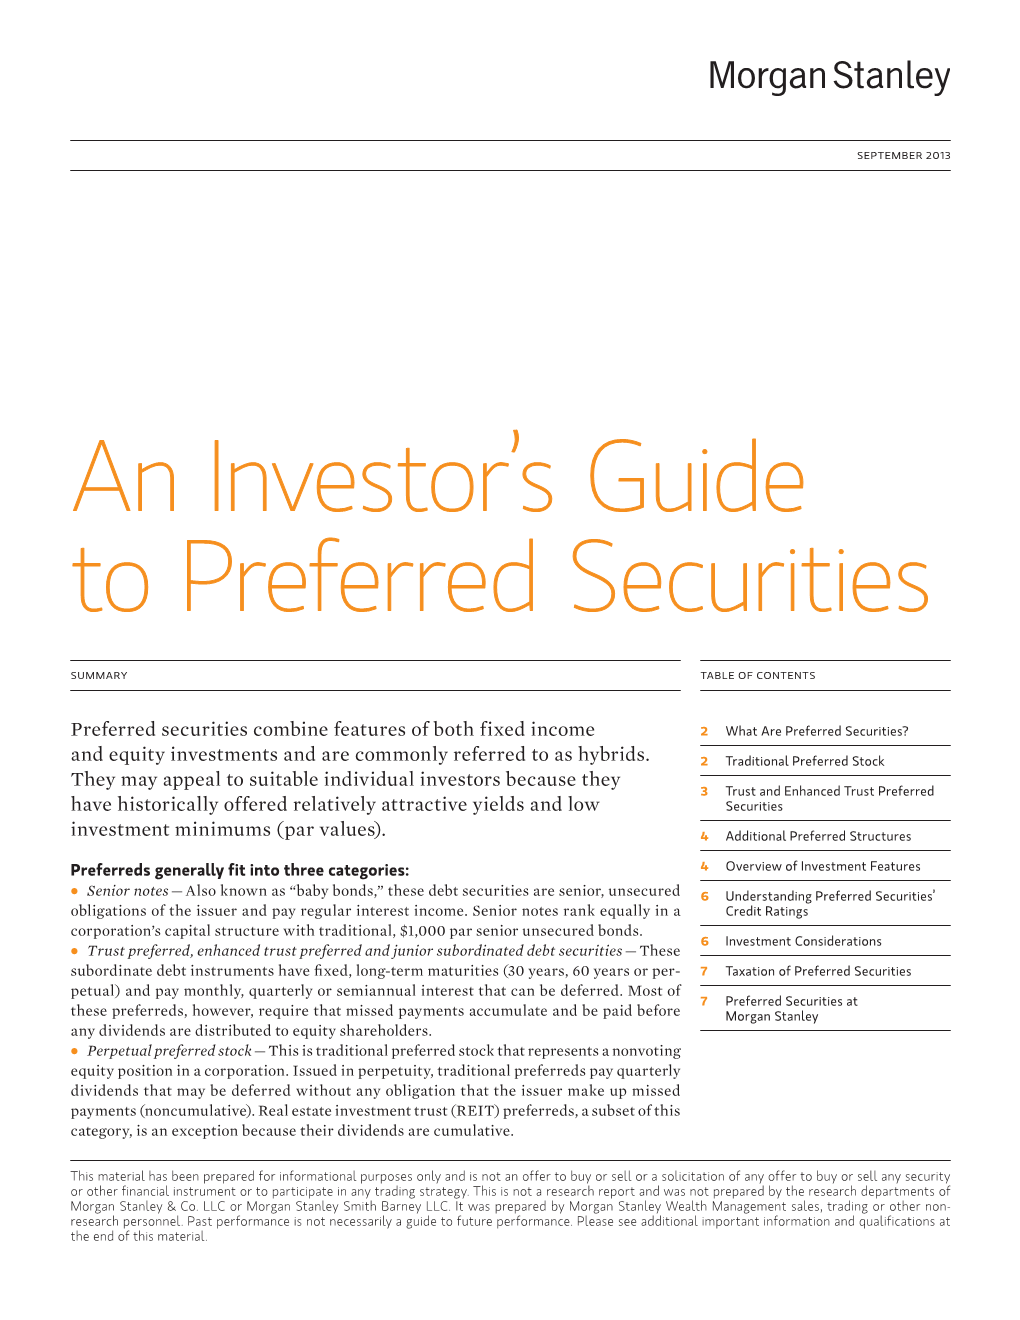 An Investor's Guide to Preferred Securities